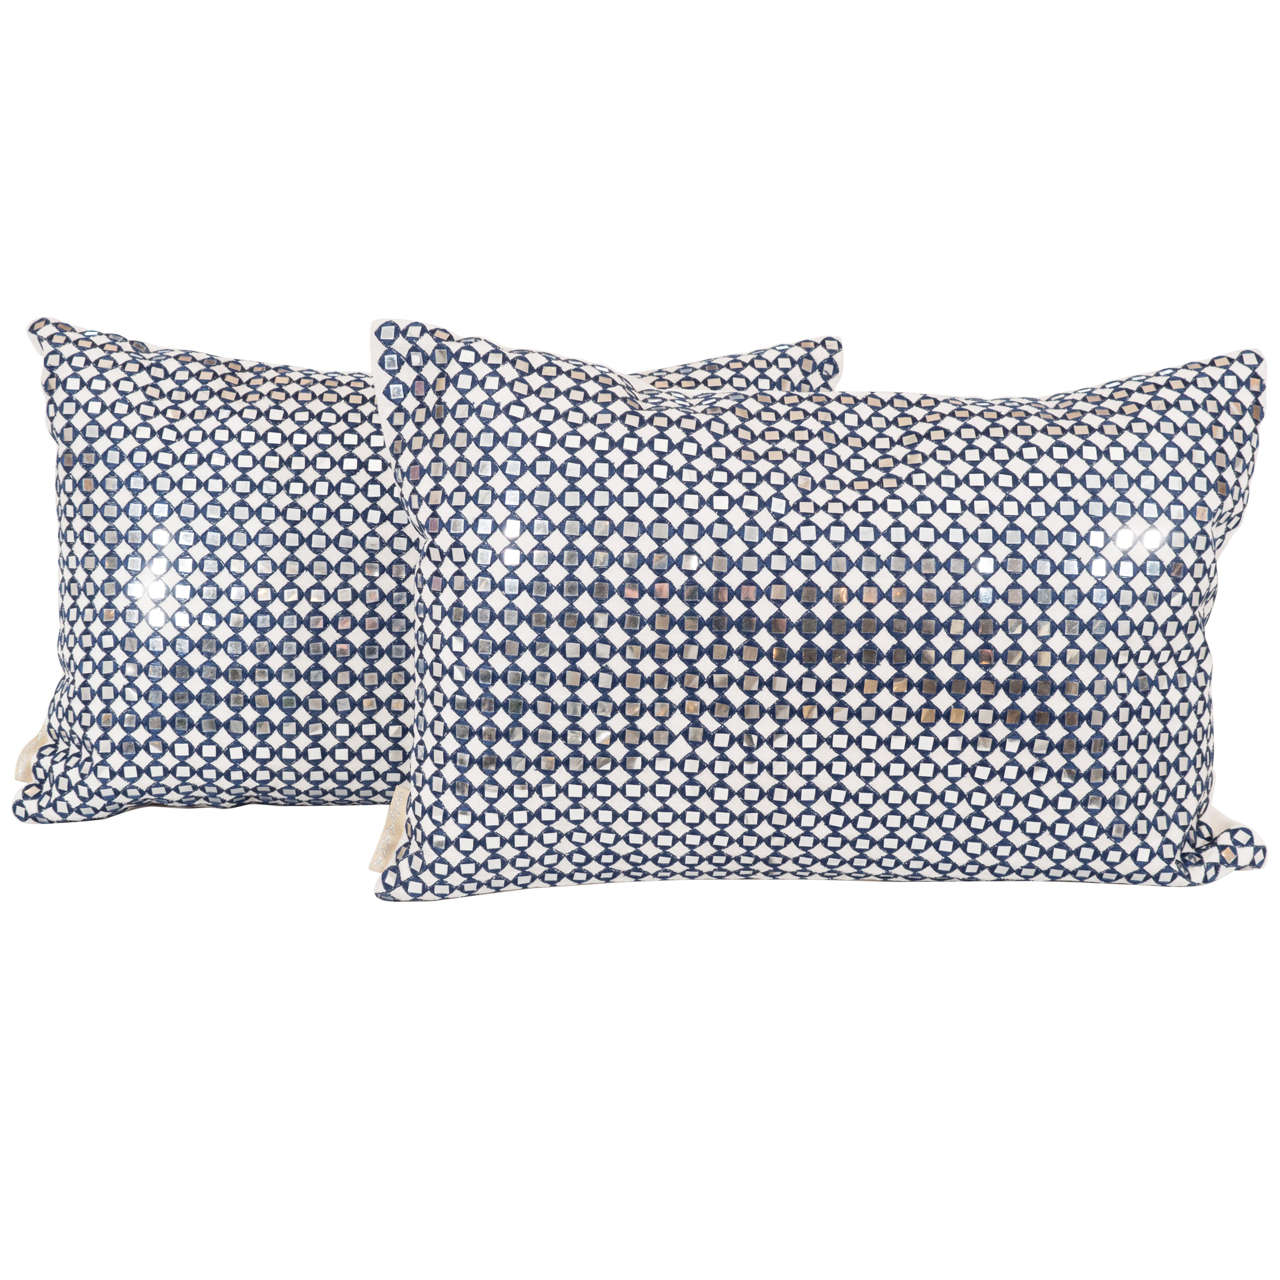 Pair of Sparkly Pillows